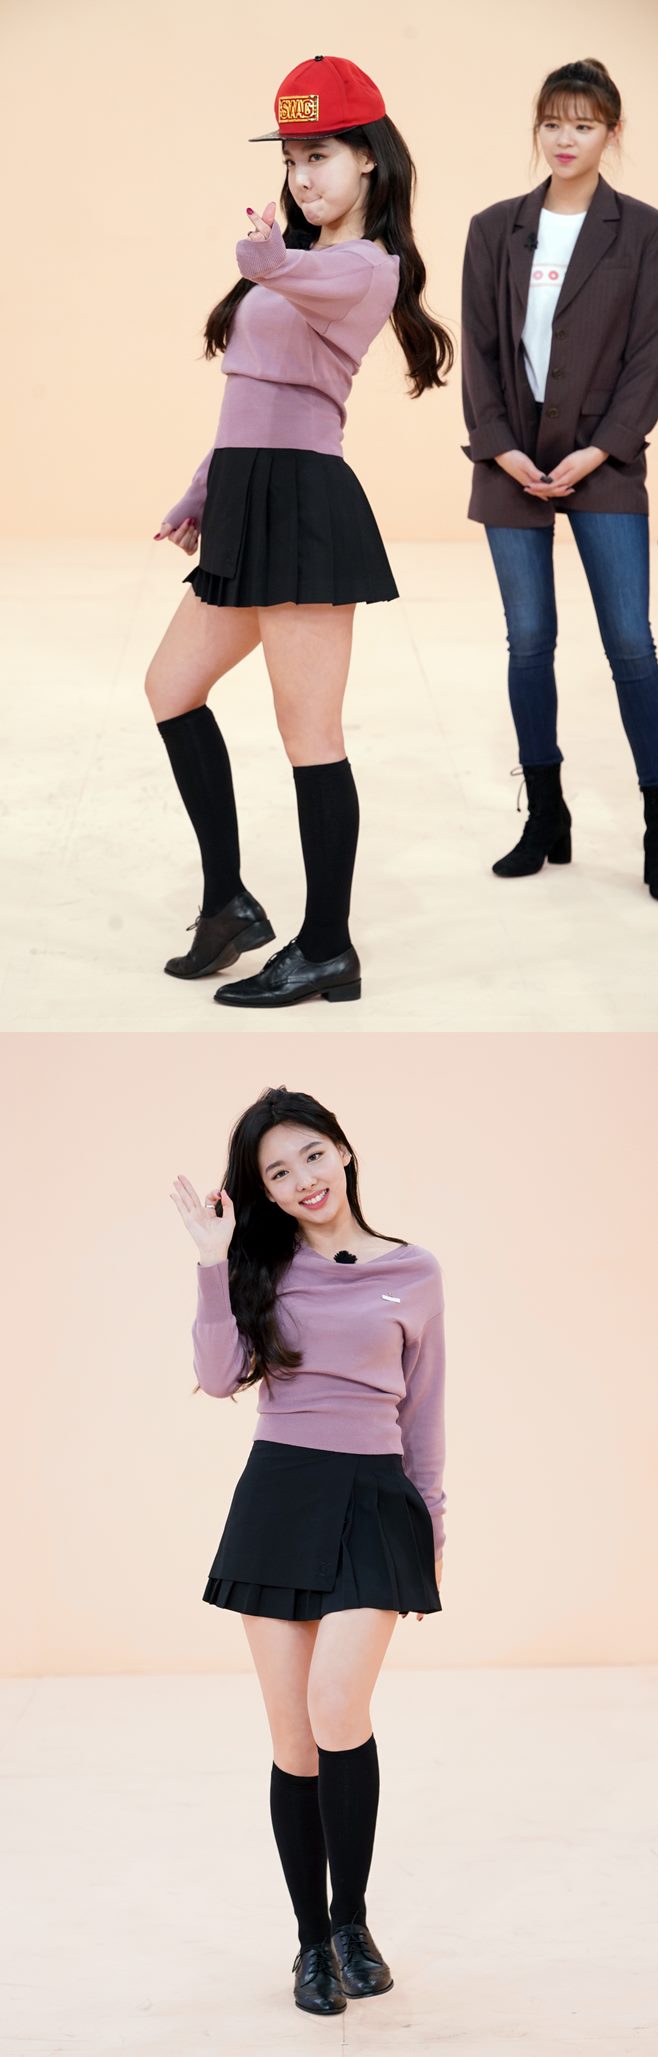 In Idol room, Nayeon of group TWICE plays the stage in line with singer IUs Pippi.The comprehensive programming channel JTBC entertainment program Idol room will be accompanied by TWICE (Nayeon, Jung Yeon, Momo, Sana, Jihyo, Mina, Dahyun, Chae Young and Tsuwi), who came back with the new song Yes or Yes.TWICE Nayeon, who got the rap name MC Rail at the time of his last appearance, picked up Haons Barcode and laughed and cheered with his extraordinary Sweg.When MC Jung Hyung-don mentioned his previous activities again in the recent Idol room recording, Nayeon laughed, saying, I was embarrassed and did not see video properly.Jihyo then reported, (Nayeon) worked hard to practice facial expressions to my senior IU song.Nayeon was ashamed, but he said, I will not take it out. He showed confidence in Pro Idol and received the expectation of the members.Nayeon is the back door of the show, which featured stage manners that overwhelmed the scene in line with IUs Pippi. It aired at 6:30 p.m. that evening.